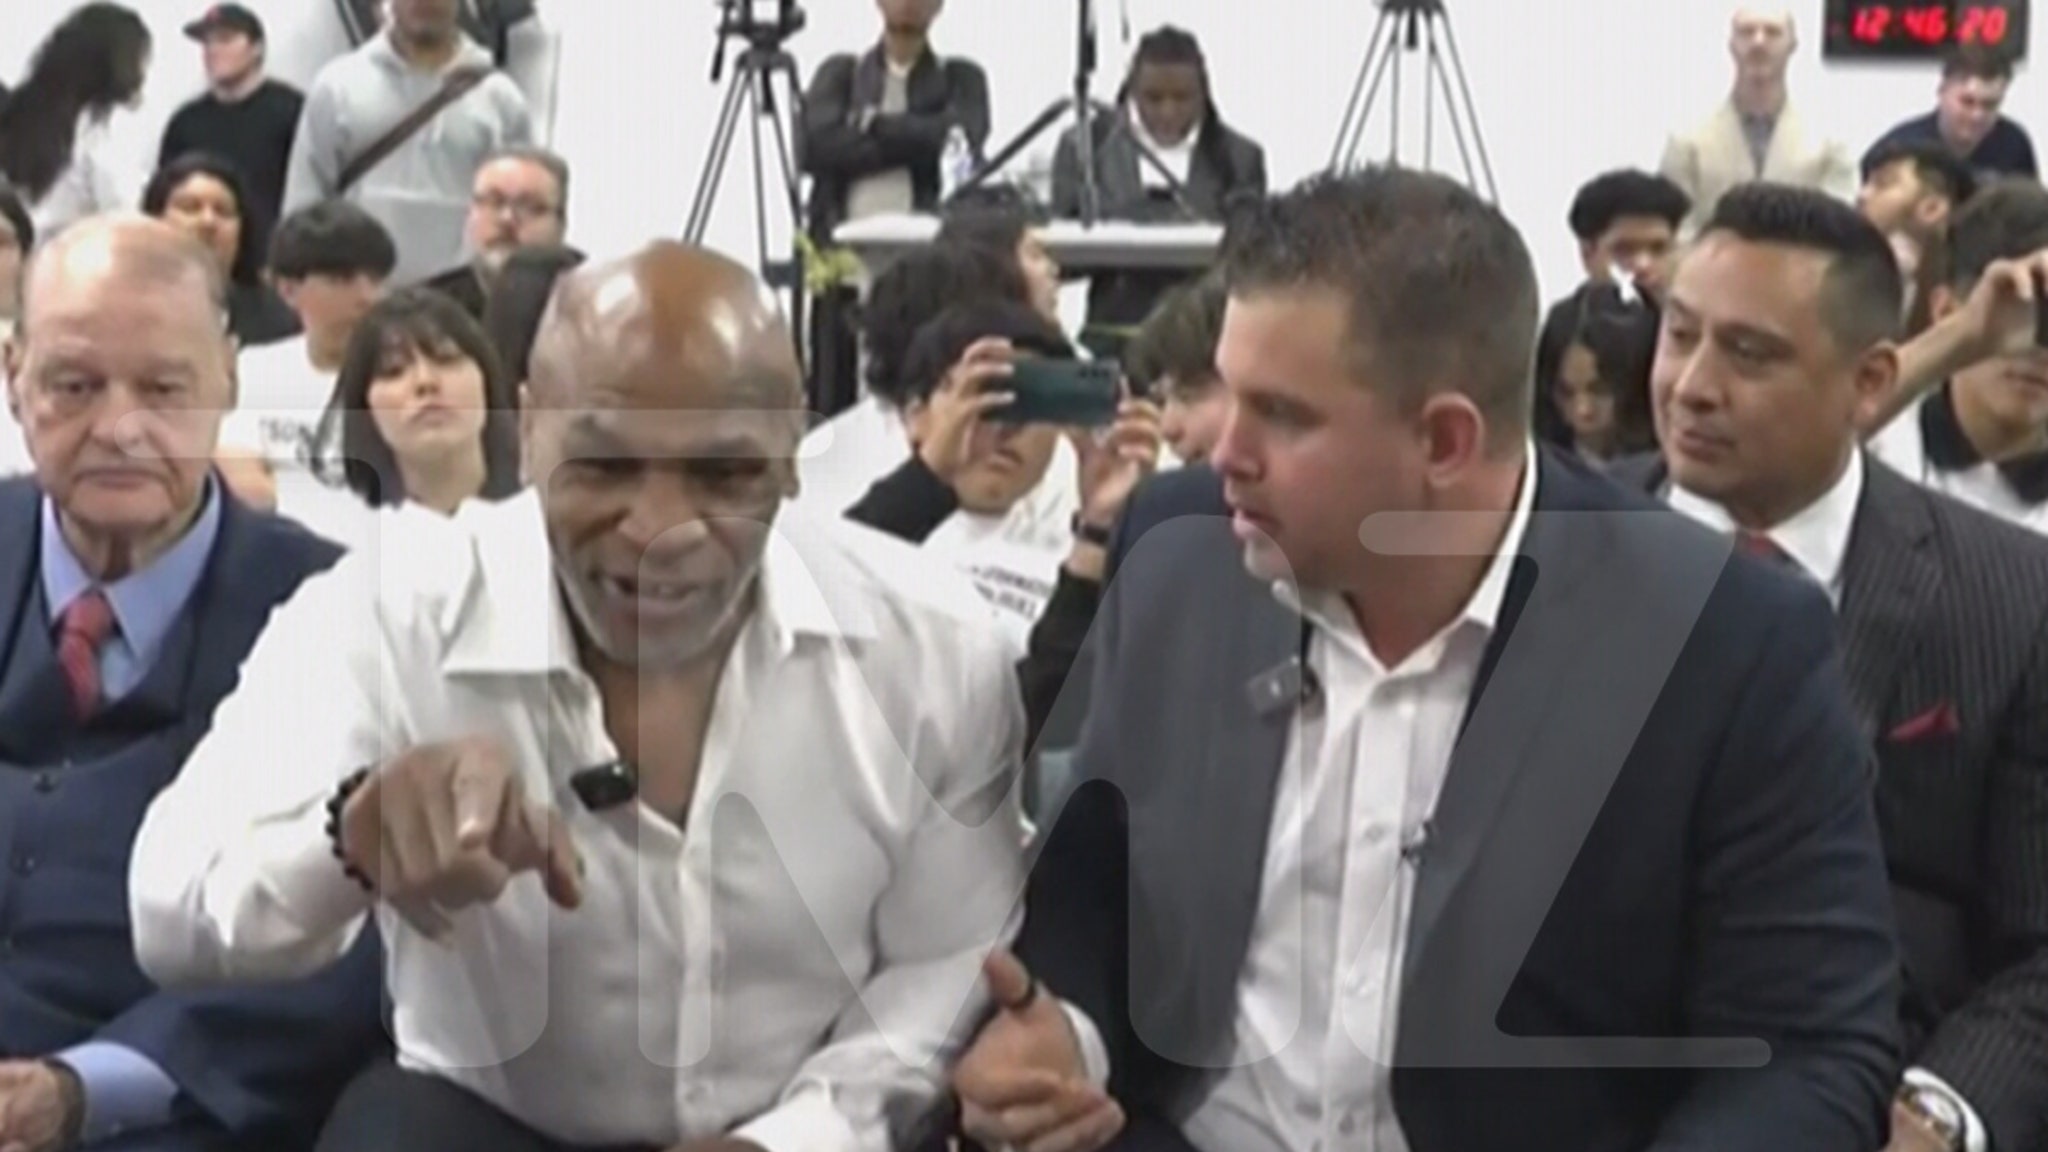 Mike Tyson & Daniel Puder Join Forces for School Initiatives